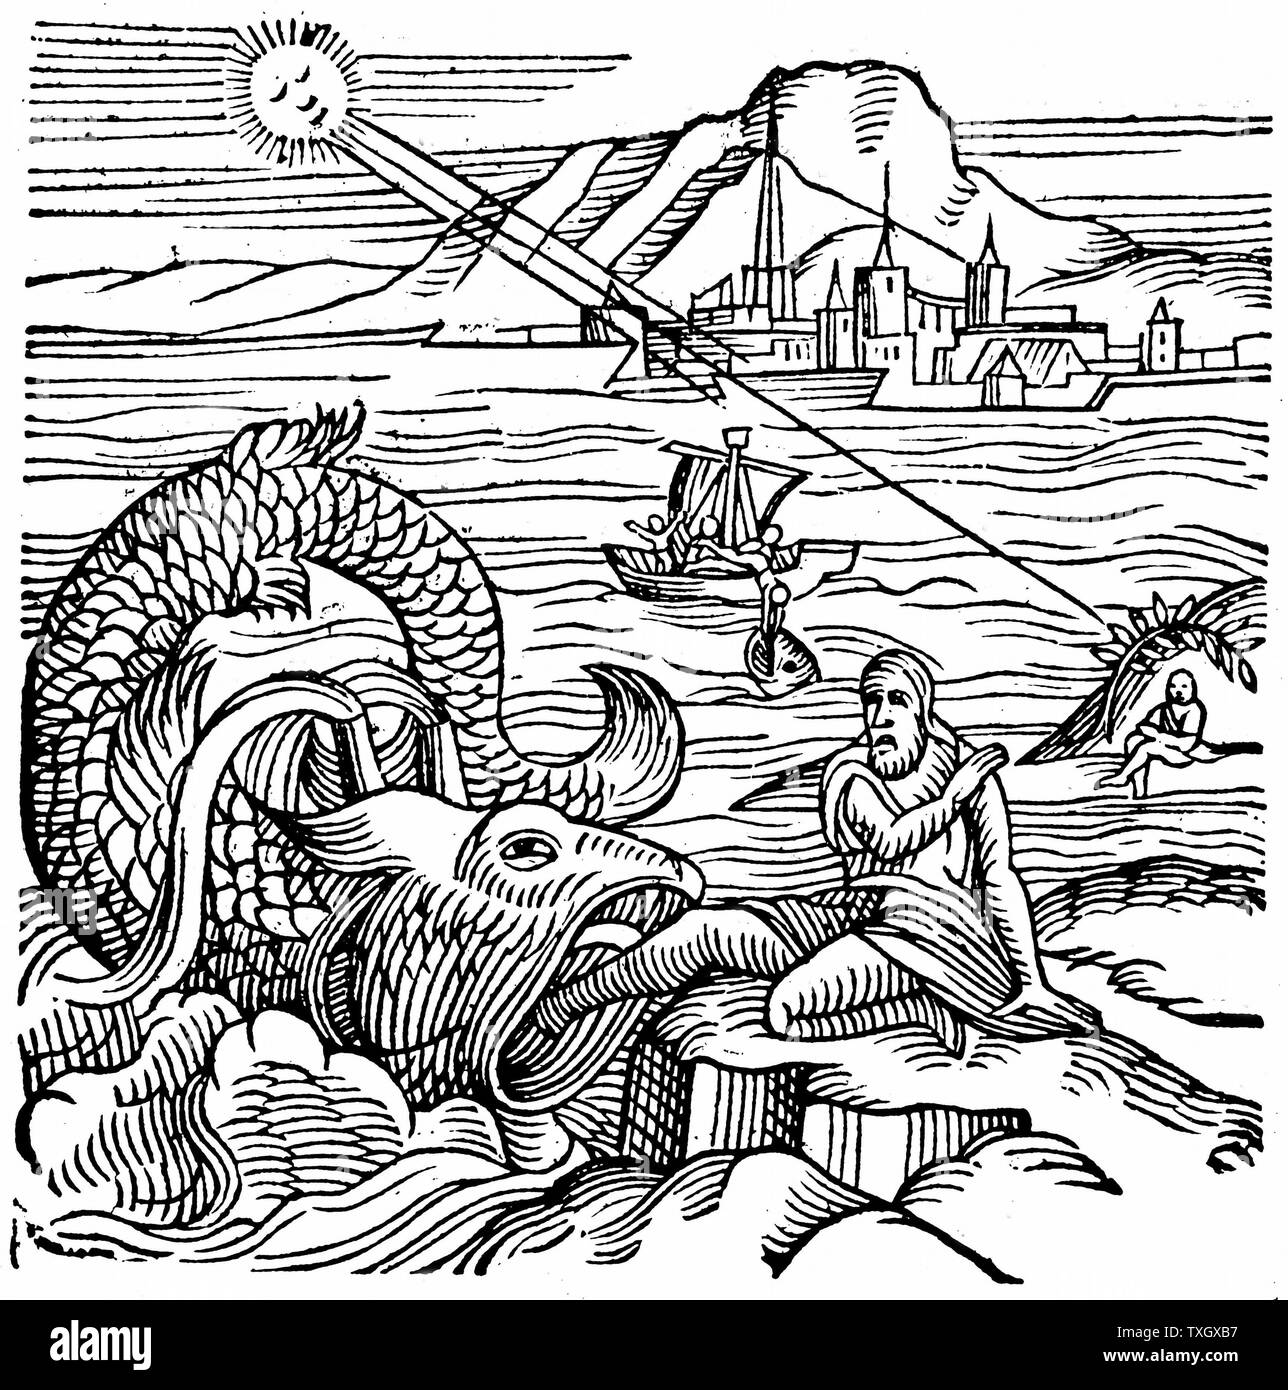 Jonah being spewed up by the whale In middle of picture he is shown falling overboard and being swallowed. From Conrad Lycosthenes 'Prodigiorum ac ostentorum chronicon'  1557 Woodcut Basel Stock Photo